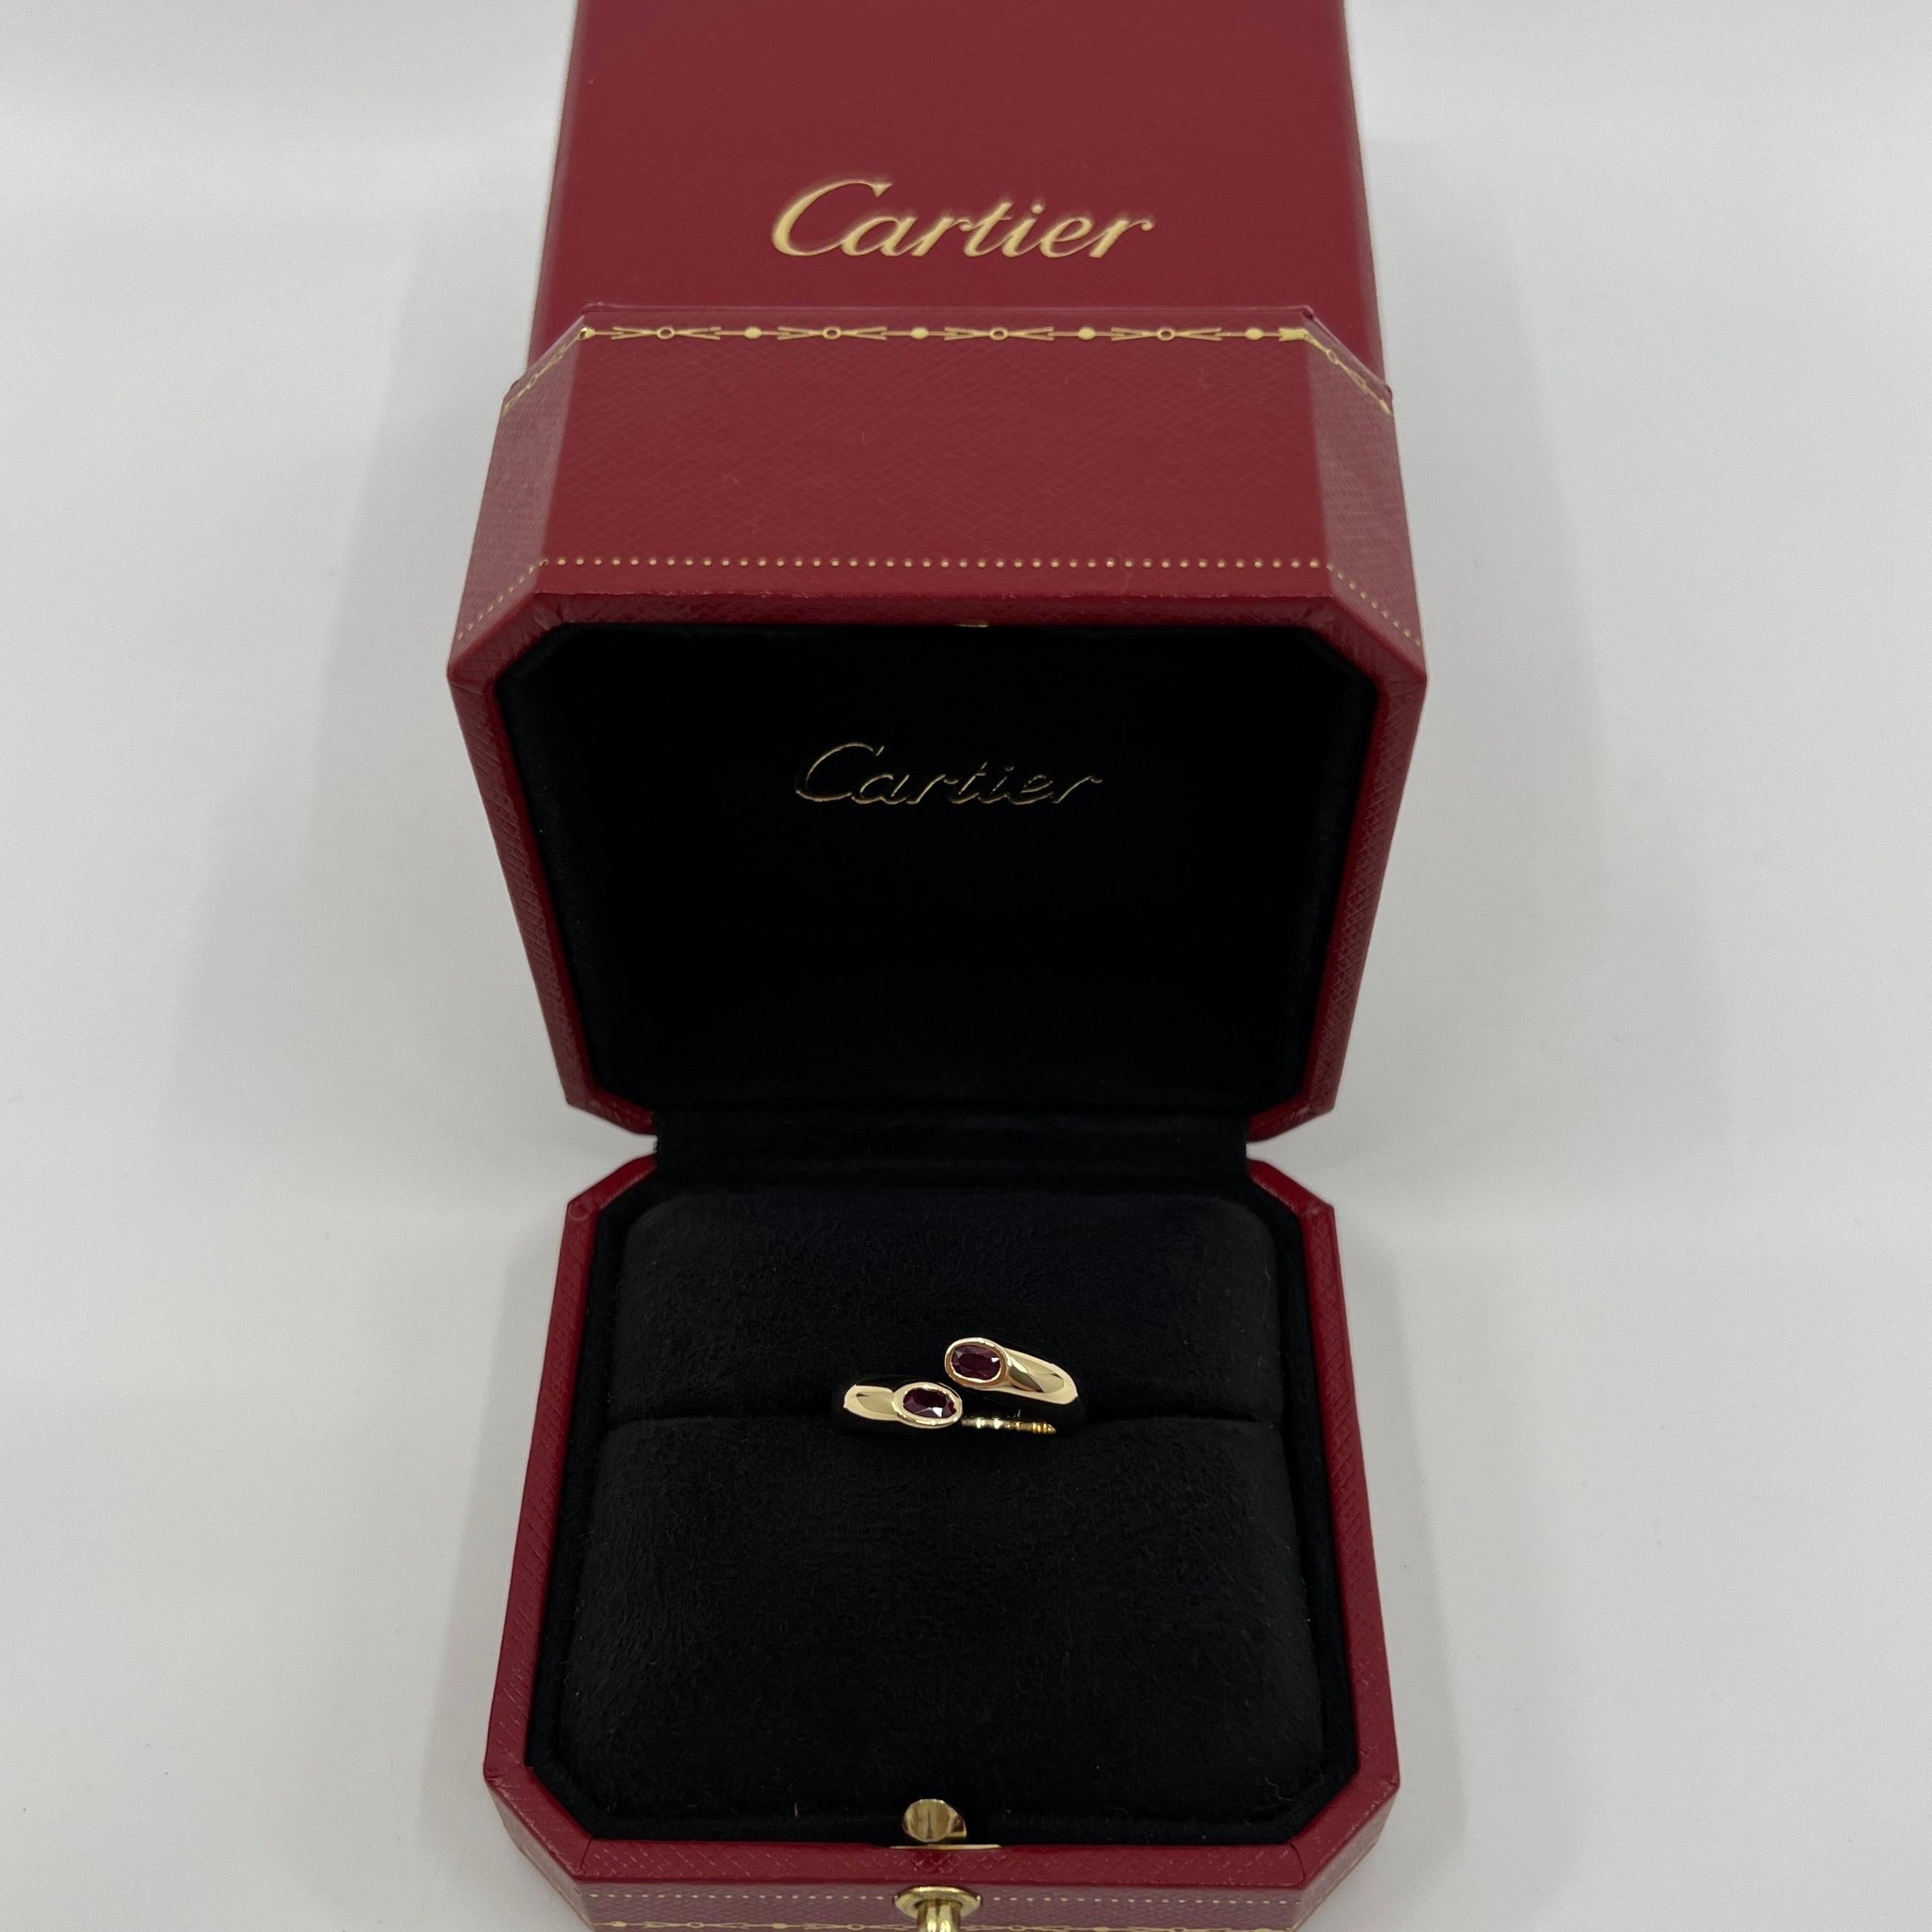 Vintage Cartier Oval Cut Red Ruby 18k Yellow Gold Split Bypass Ring.

Stunning yellow gold ring set with 2 fine deep red oval cut rubies. Fine jewellery houses like Cartier only use the finest of gemstones and these rubies are no exception.

Two